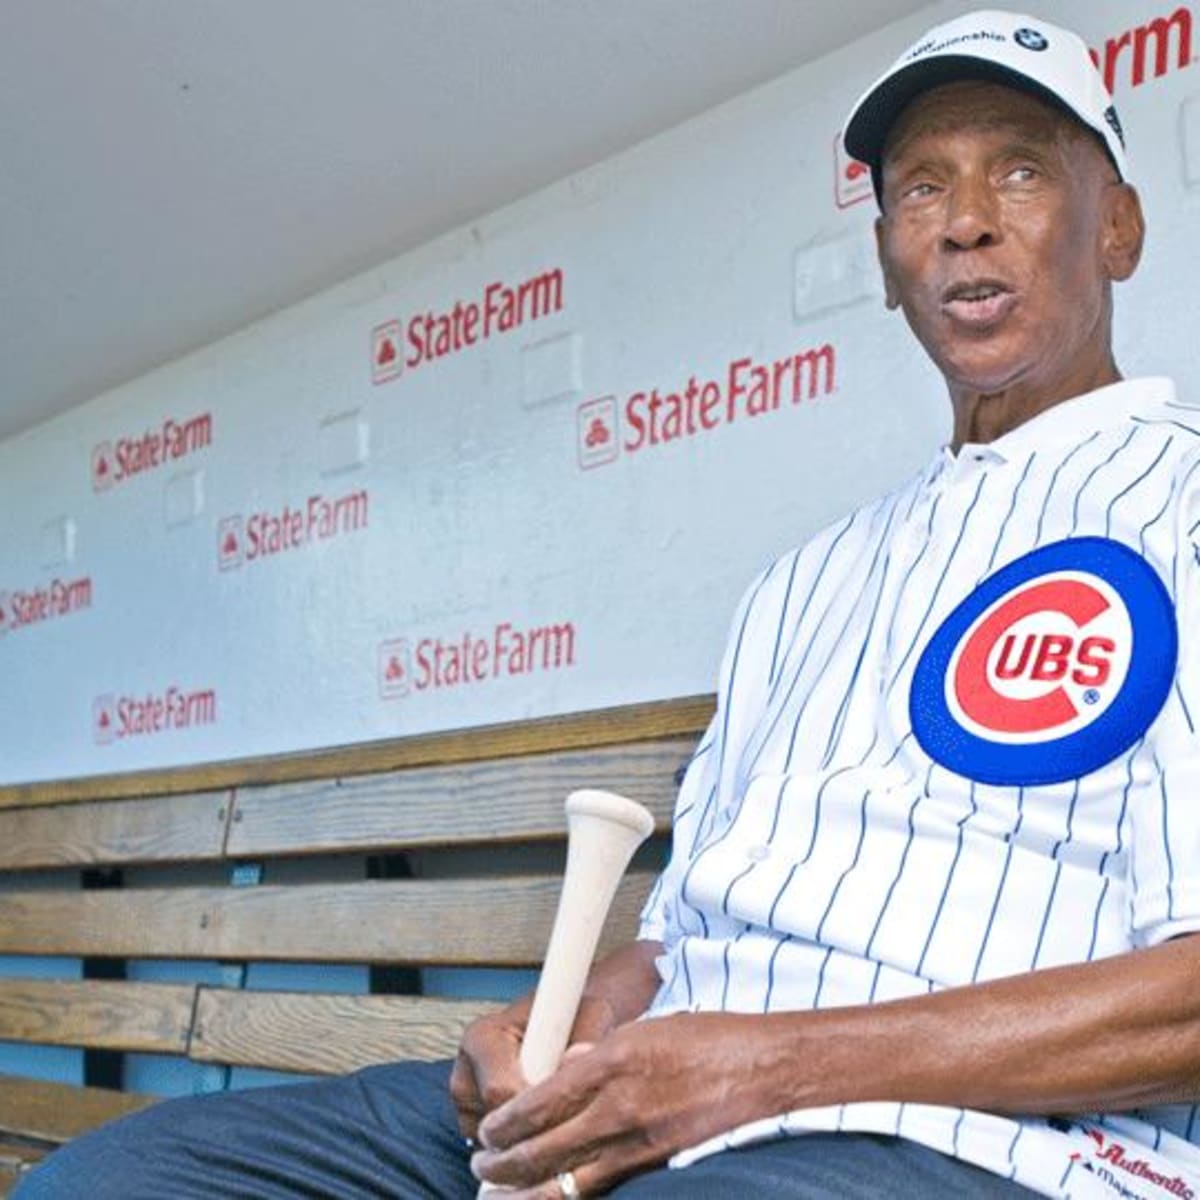 Chicago Cub Legend Ernie Banks Passes Away at the Age of 83